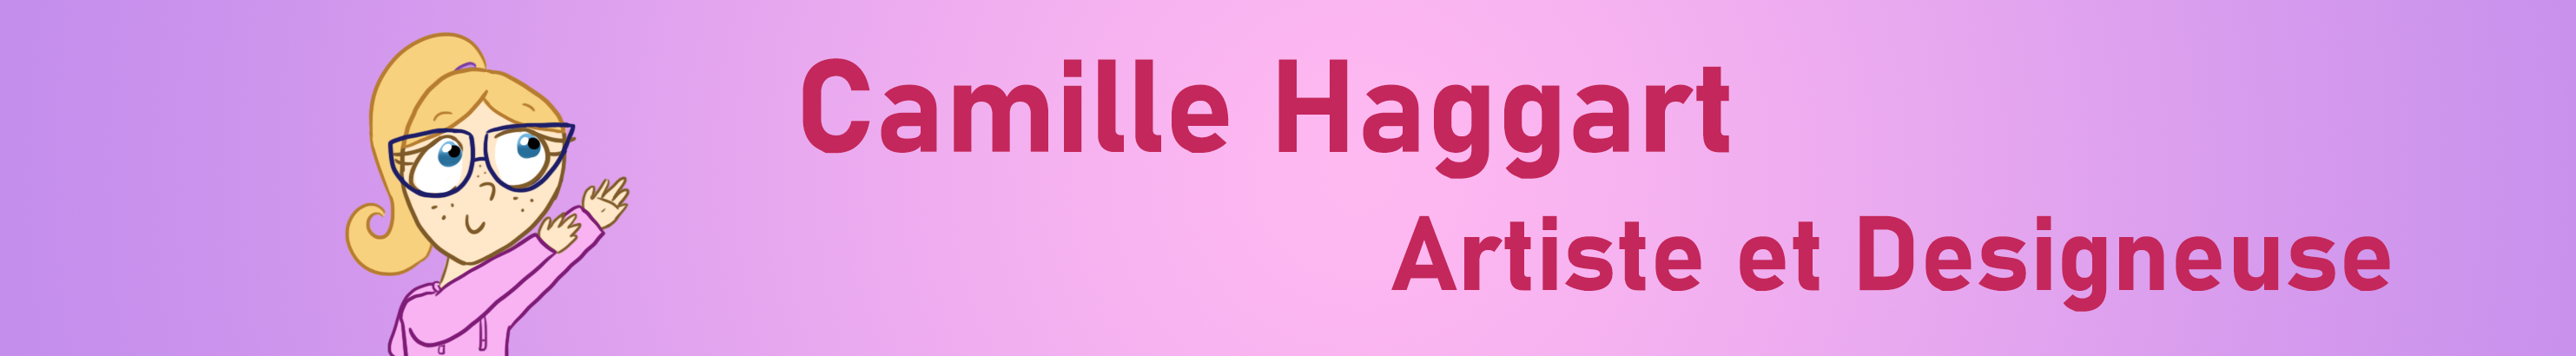 Camille Haggart's profile banner